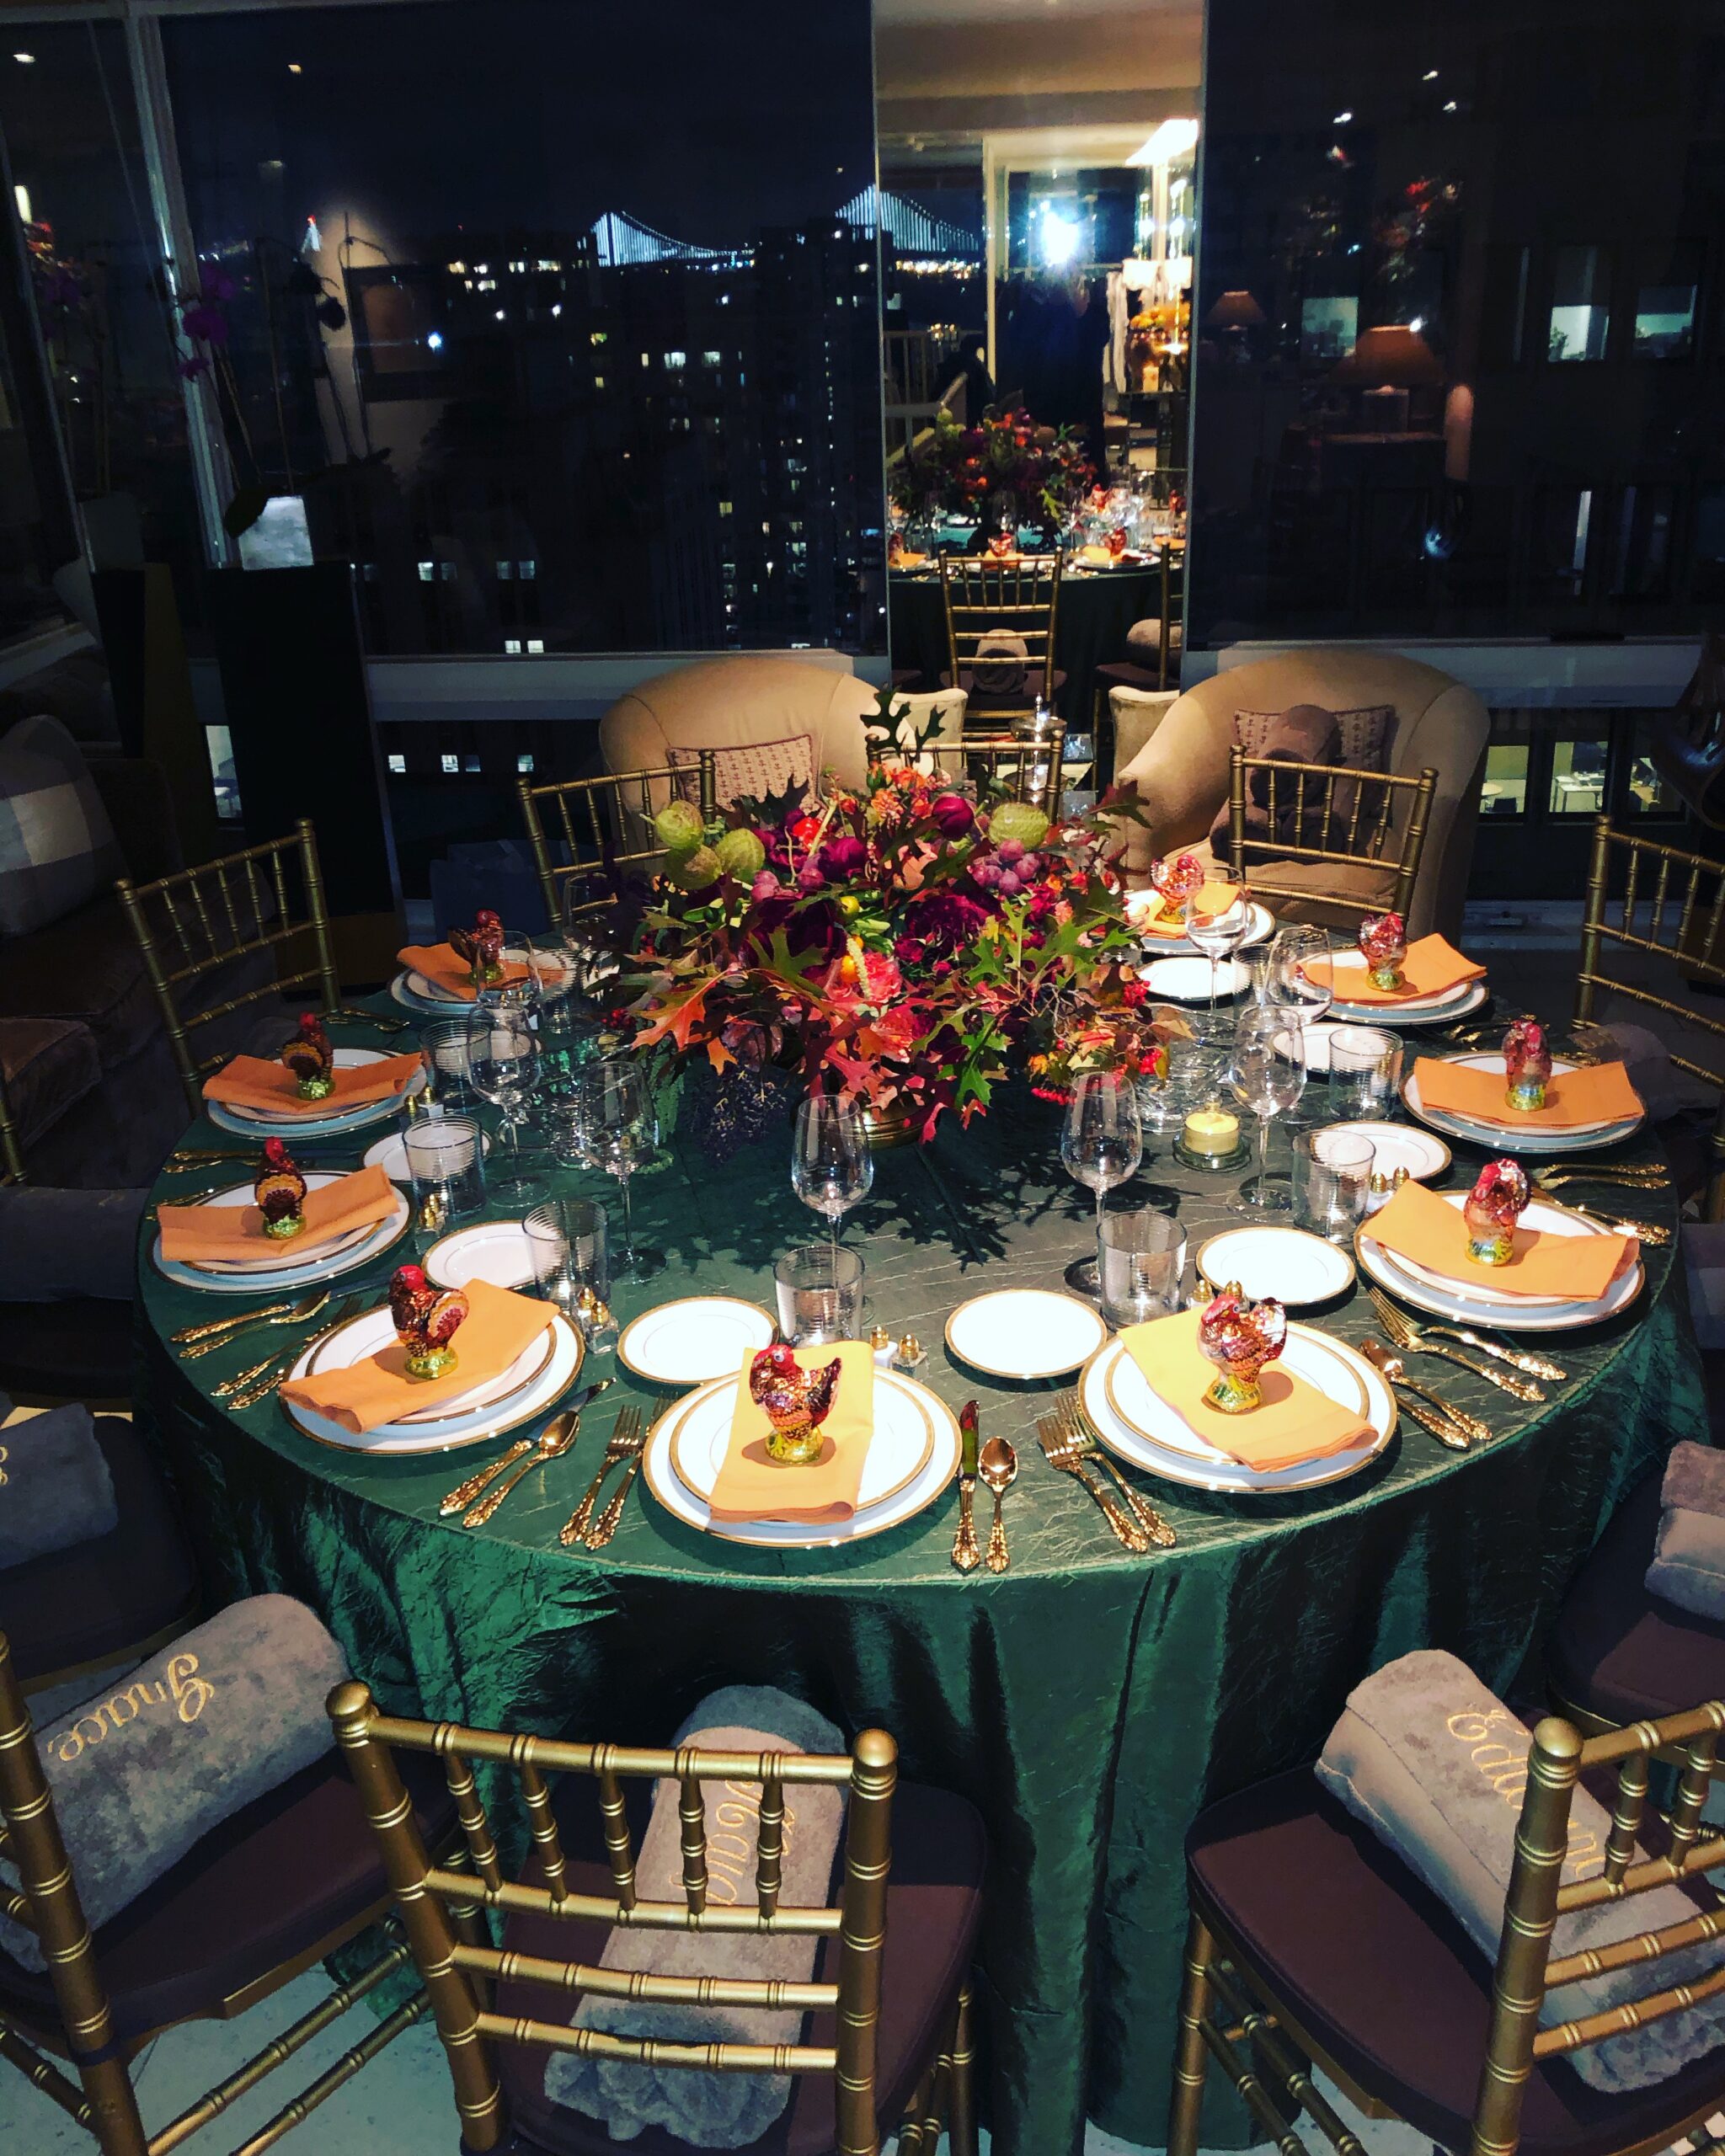 Neiman Marcus Closed Out New York Fashion With a Diner-Set Fete